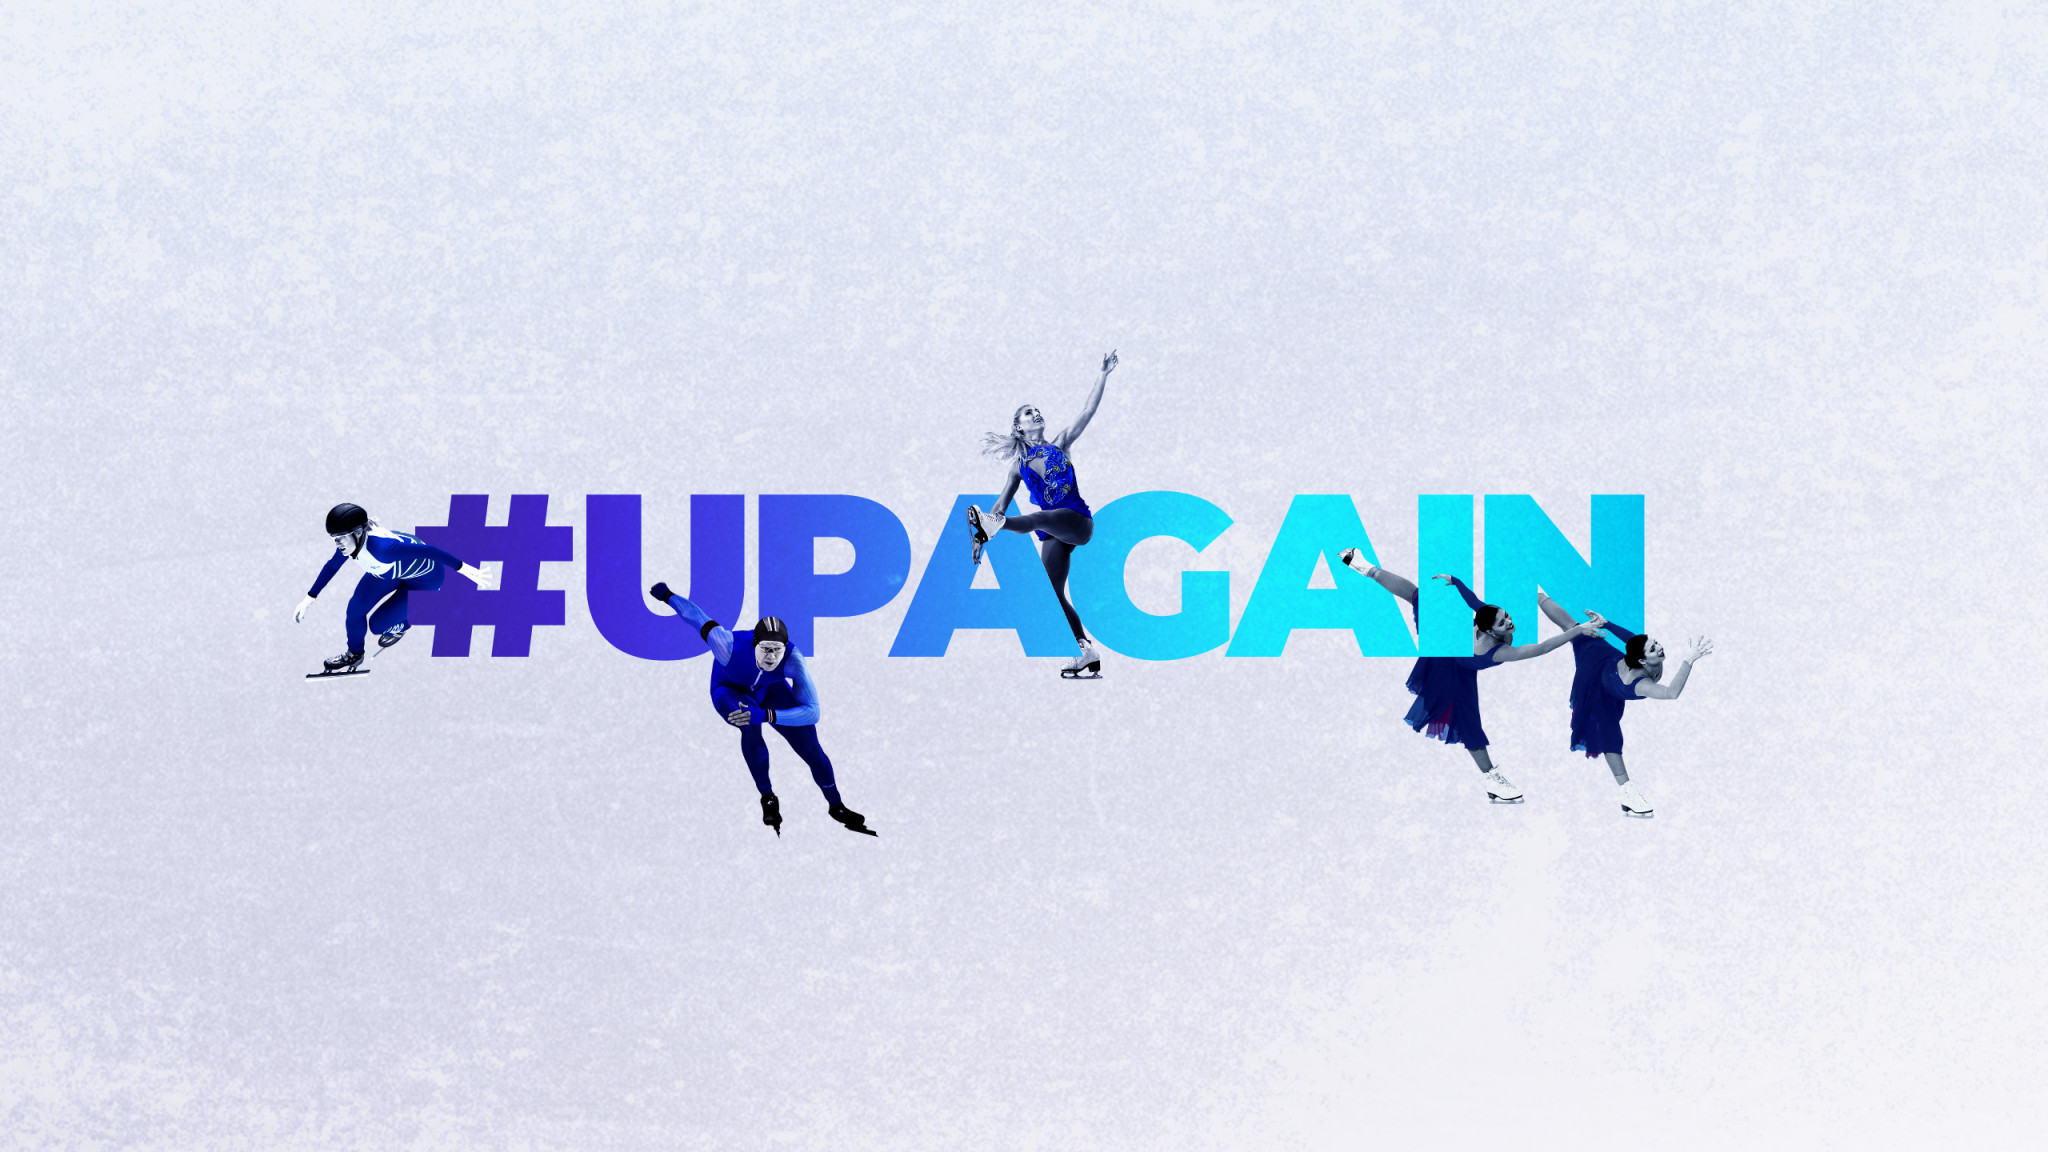 The International Skating Union launched a global digital campaign called #UpAgain ©ISU